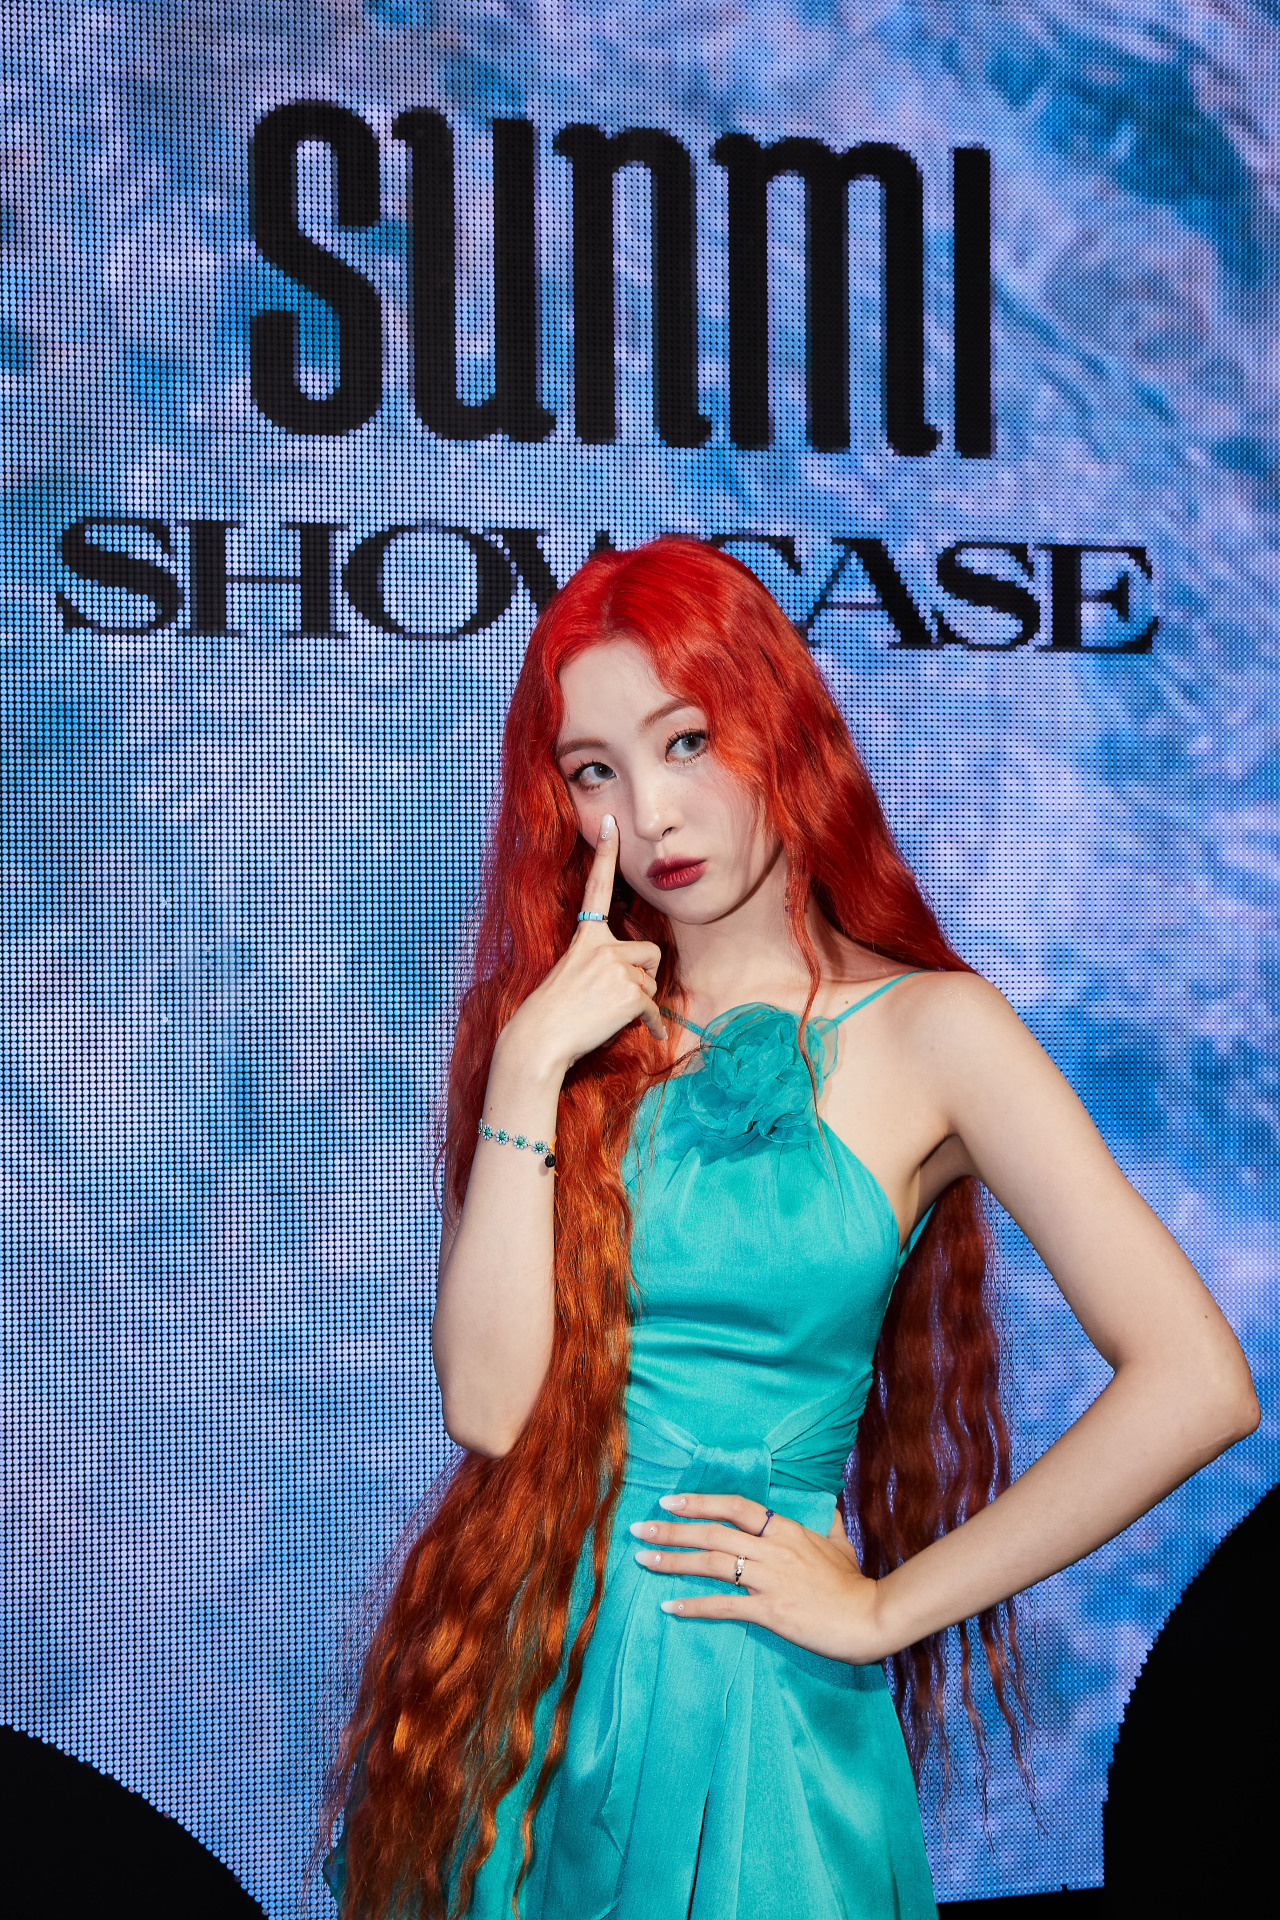 Sunmi poses during a press conference for her new digital single “Heart Burn” in Seoul on Wednesday. (Abyss Company)